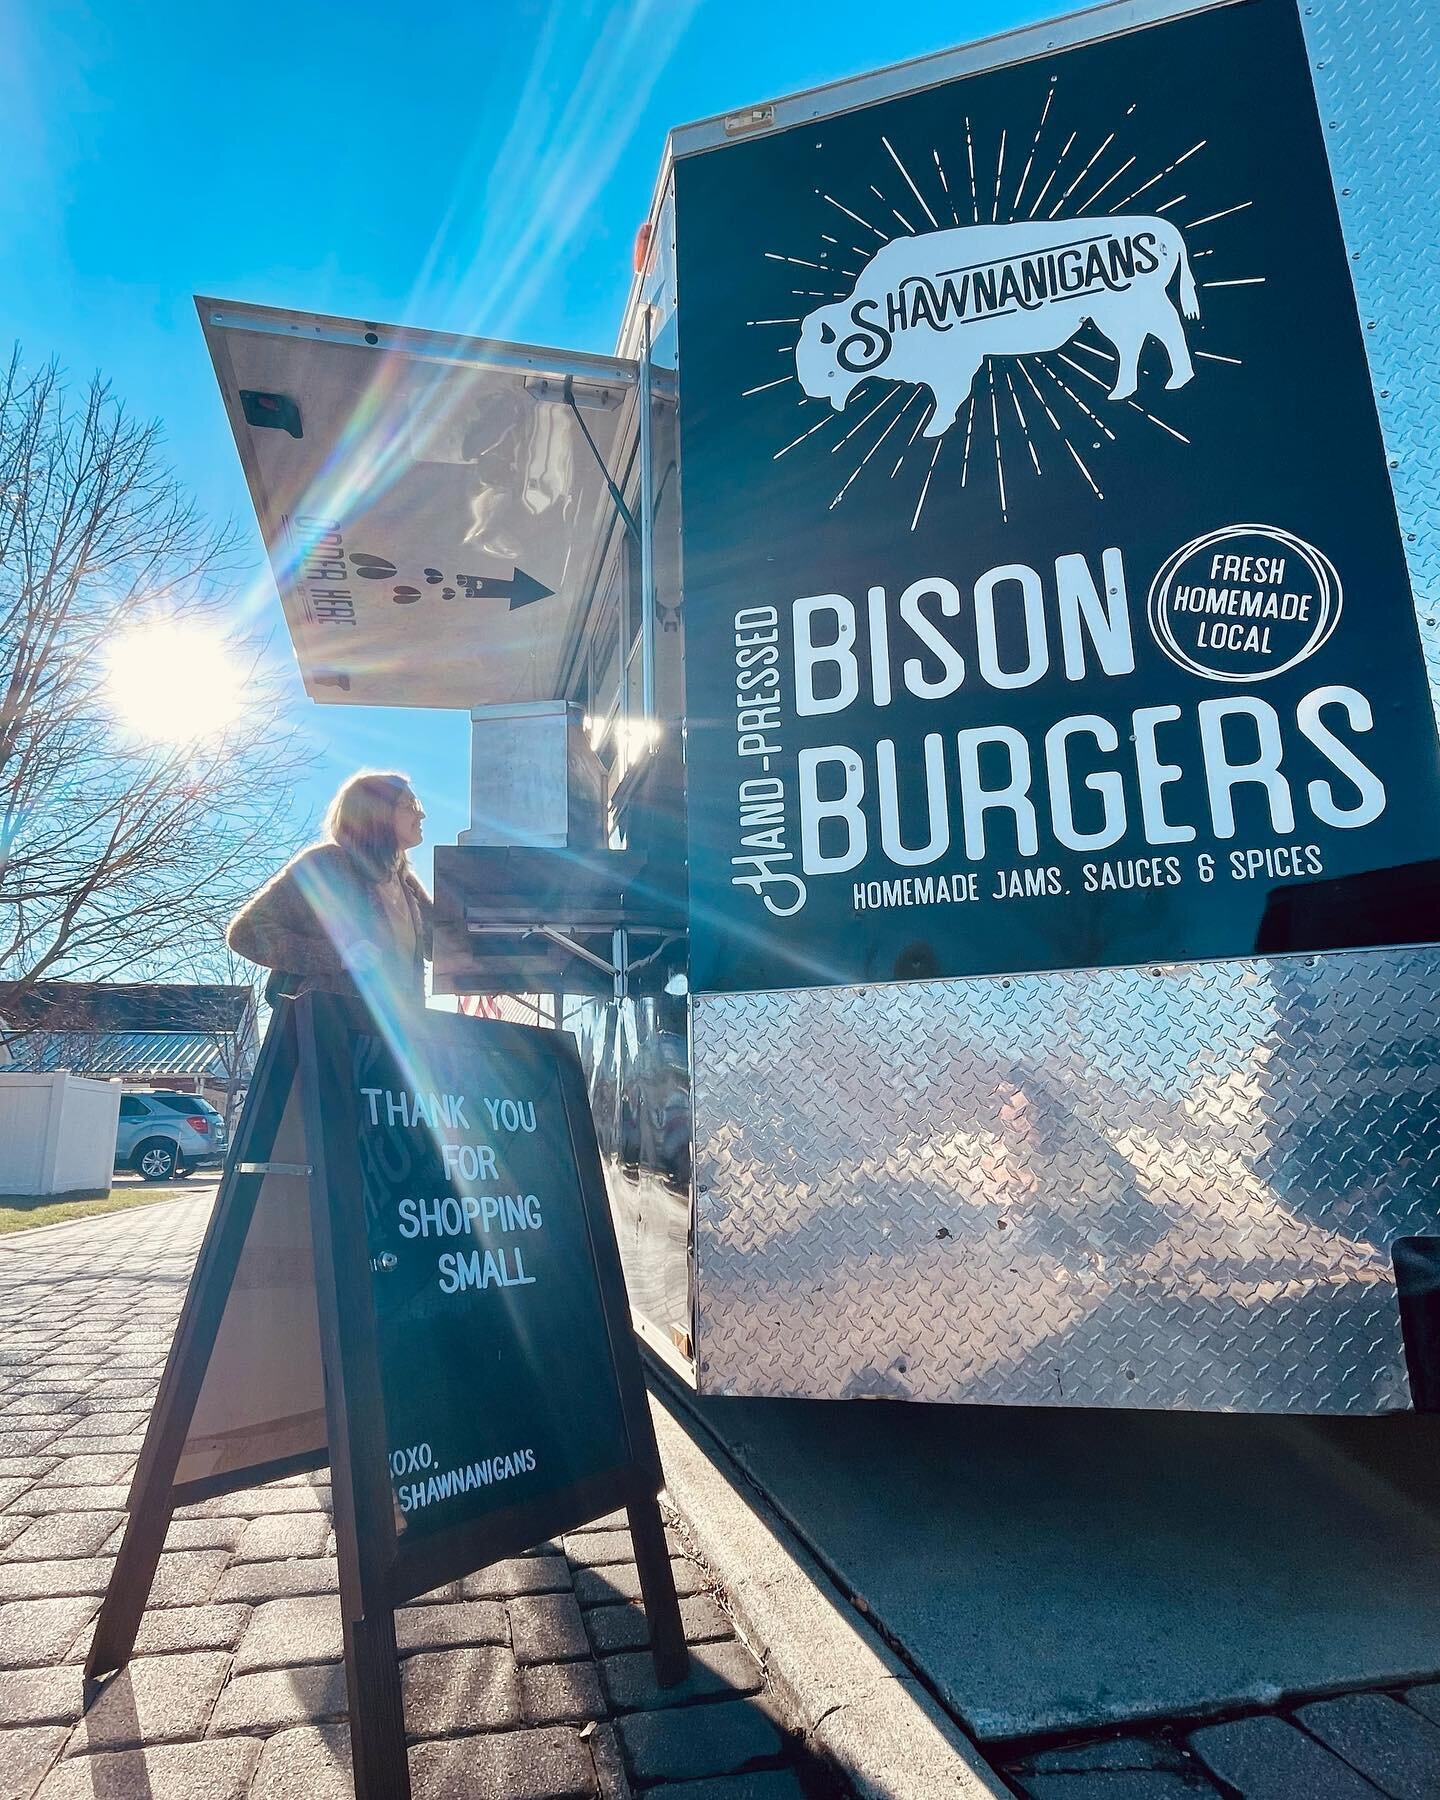 You still have three hours to shop small and support local for Small Business Saturday! 

Come eat at the truck until 6pm in the Village At Winona next to BeLove! 

#jointheherd🦬 #shawnanigans #shawnanigansfoodtruck #bison #bisonburgers #foodtruck #